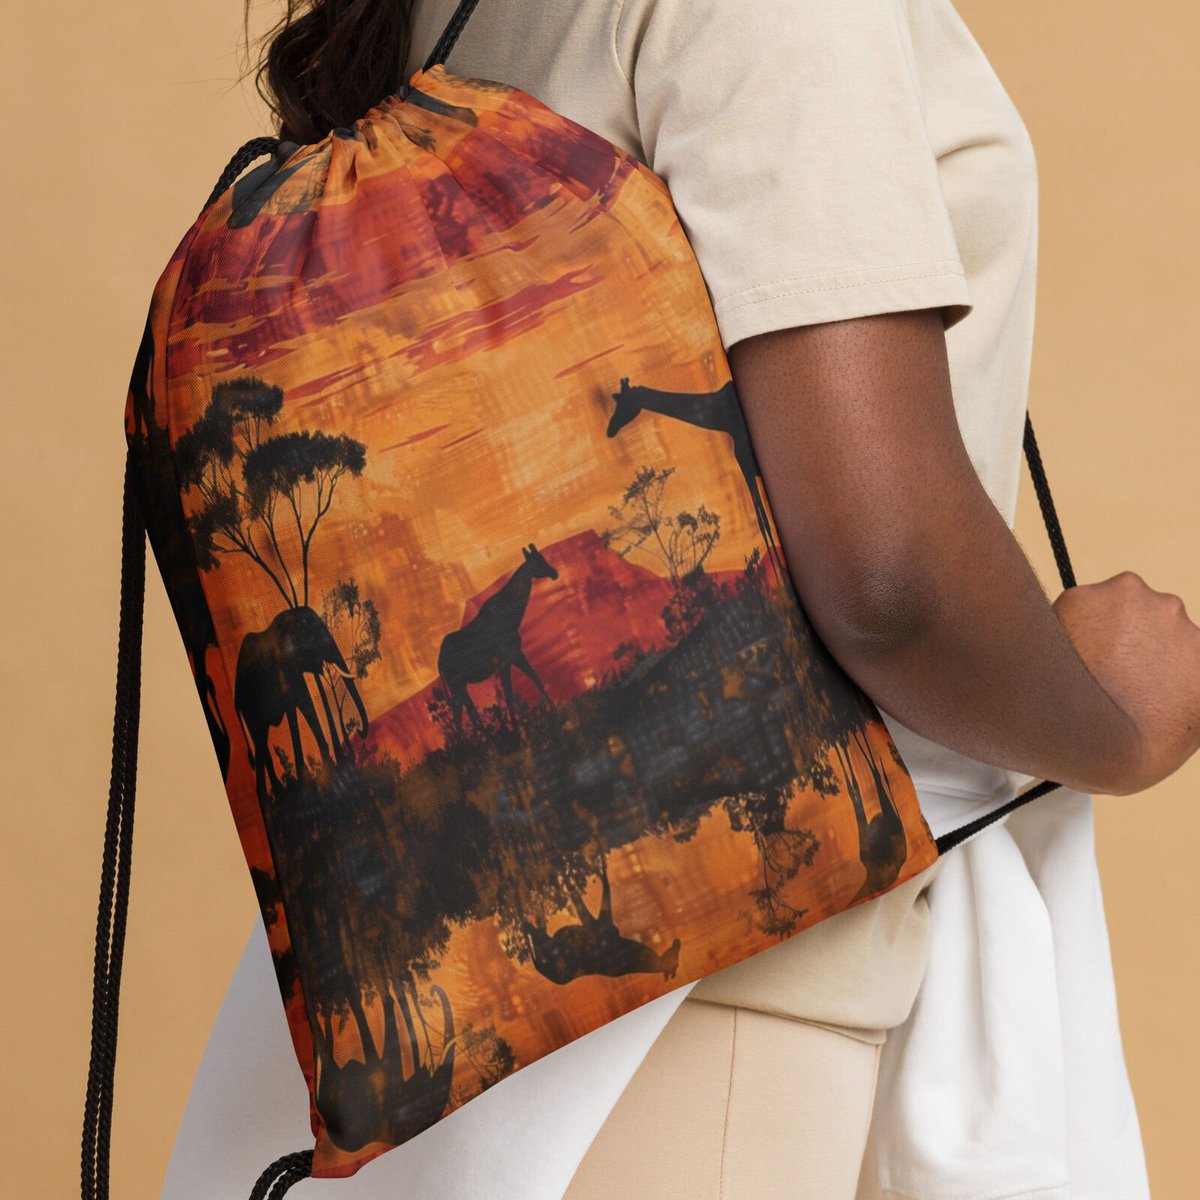 Experience Africa's beauty with our Safari Sunset Drawstring Bag! Perfect for daily adventures or as a unique gift. Shop now! #SafariFashion #AfricanInspired #EthicalFashion #DrawstringBag #GiftIdeas #eBay #bwdesignsmerch Check it out: tinyurl.com/yszwj7w7 via @eBay